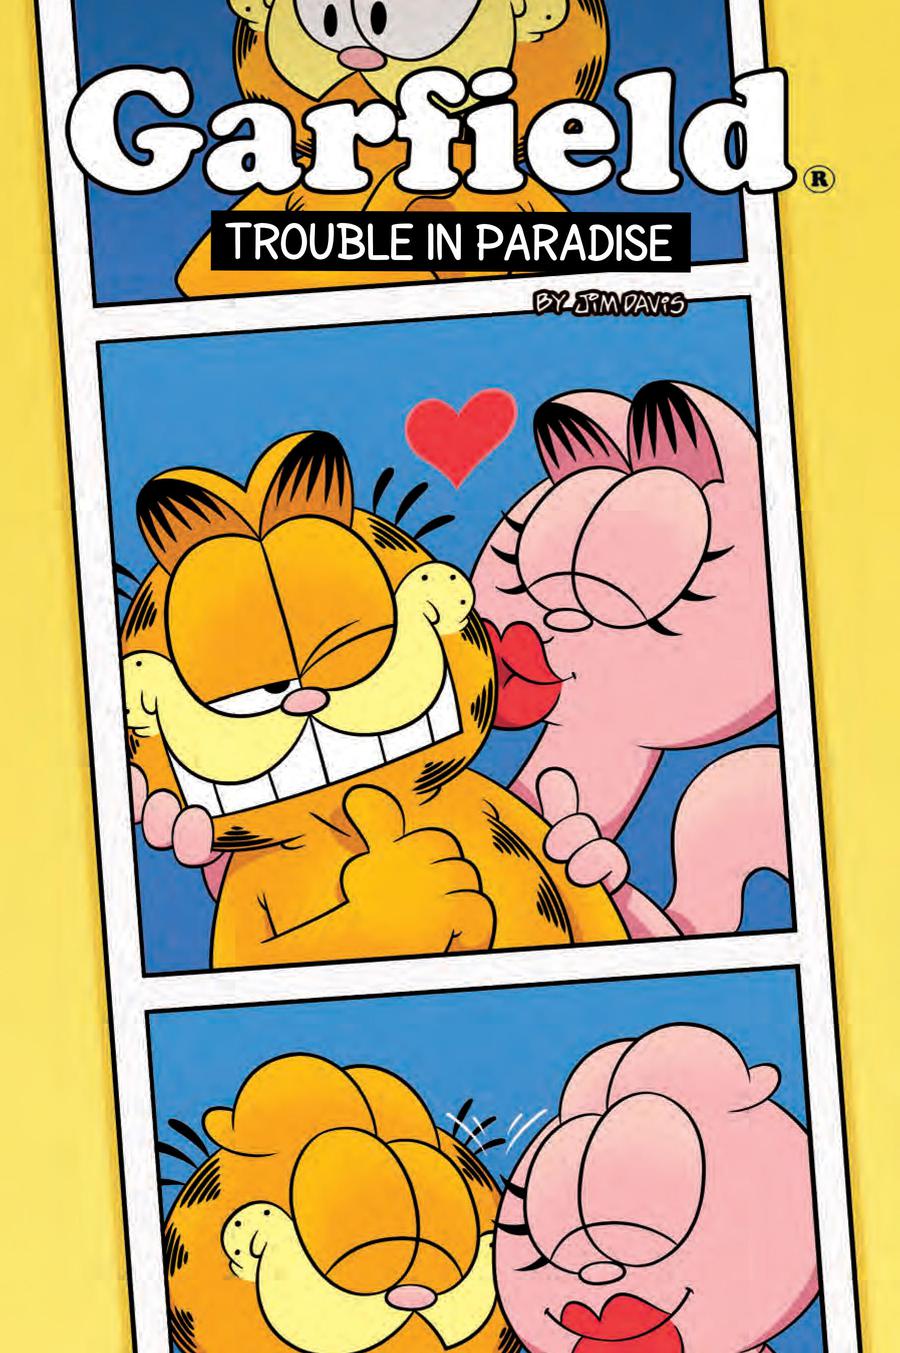 Garfield Original Graphic Novel Vol 5 Trouble In Paradise TP